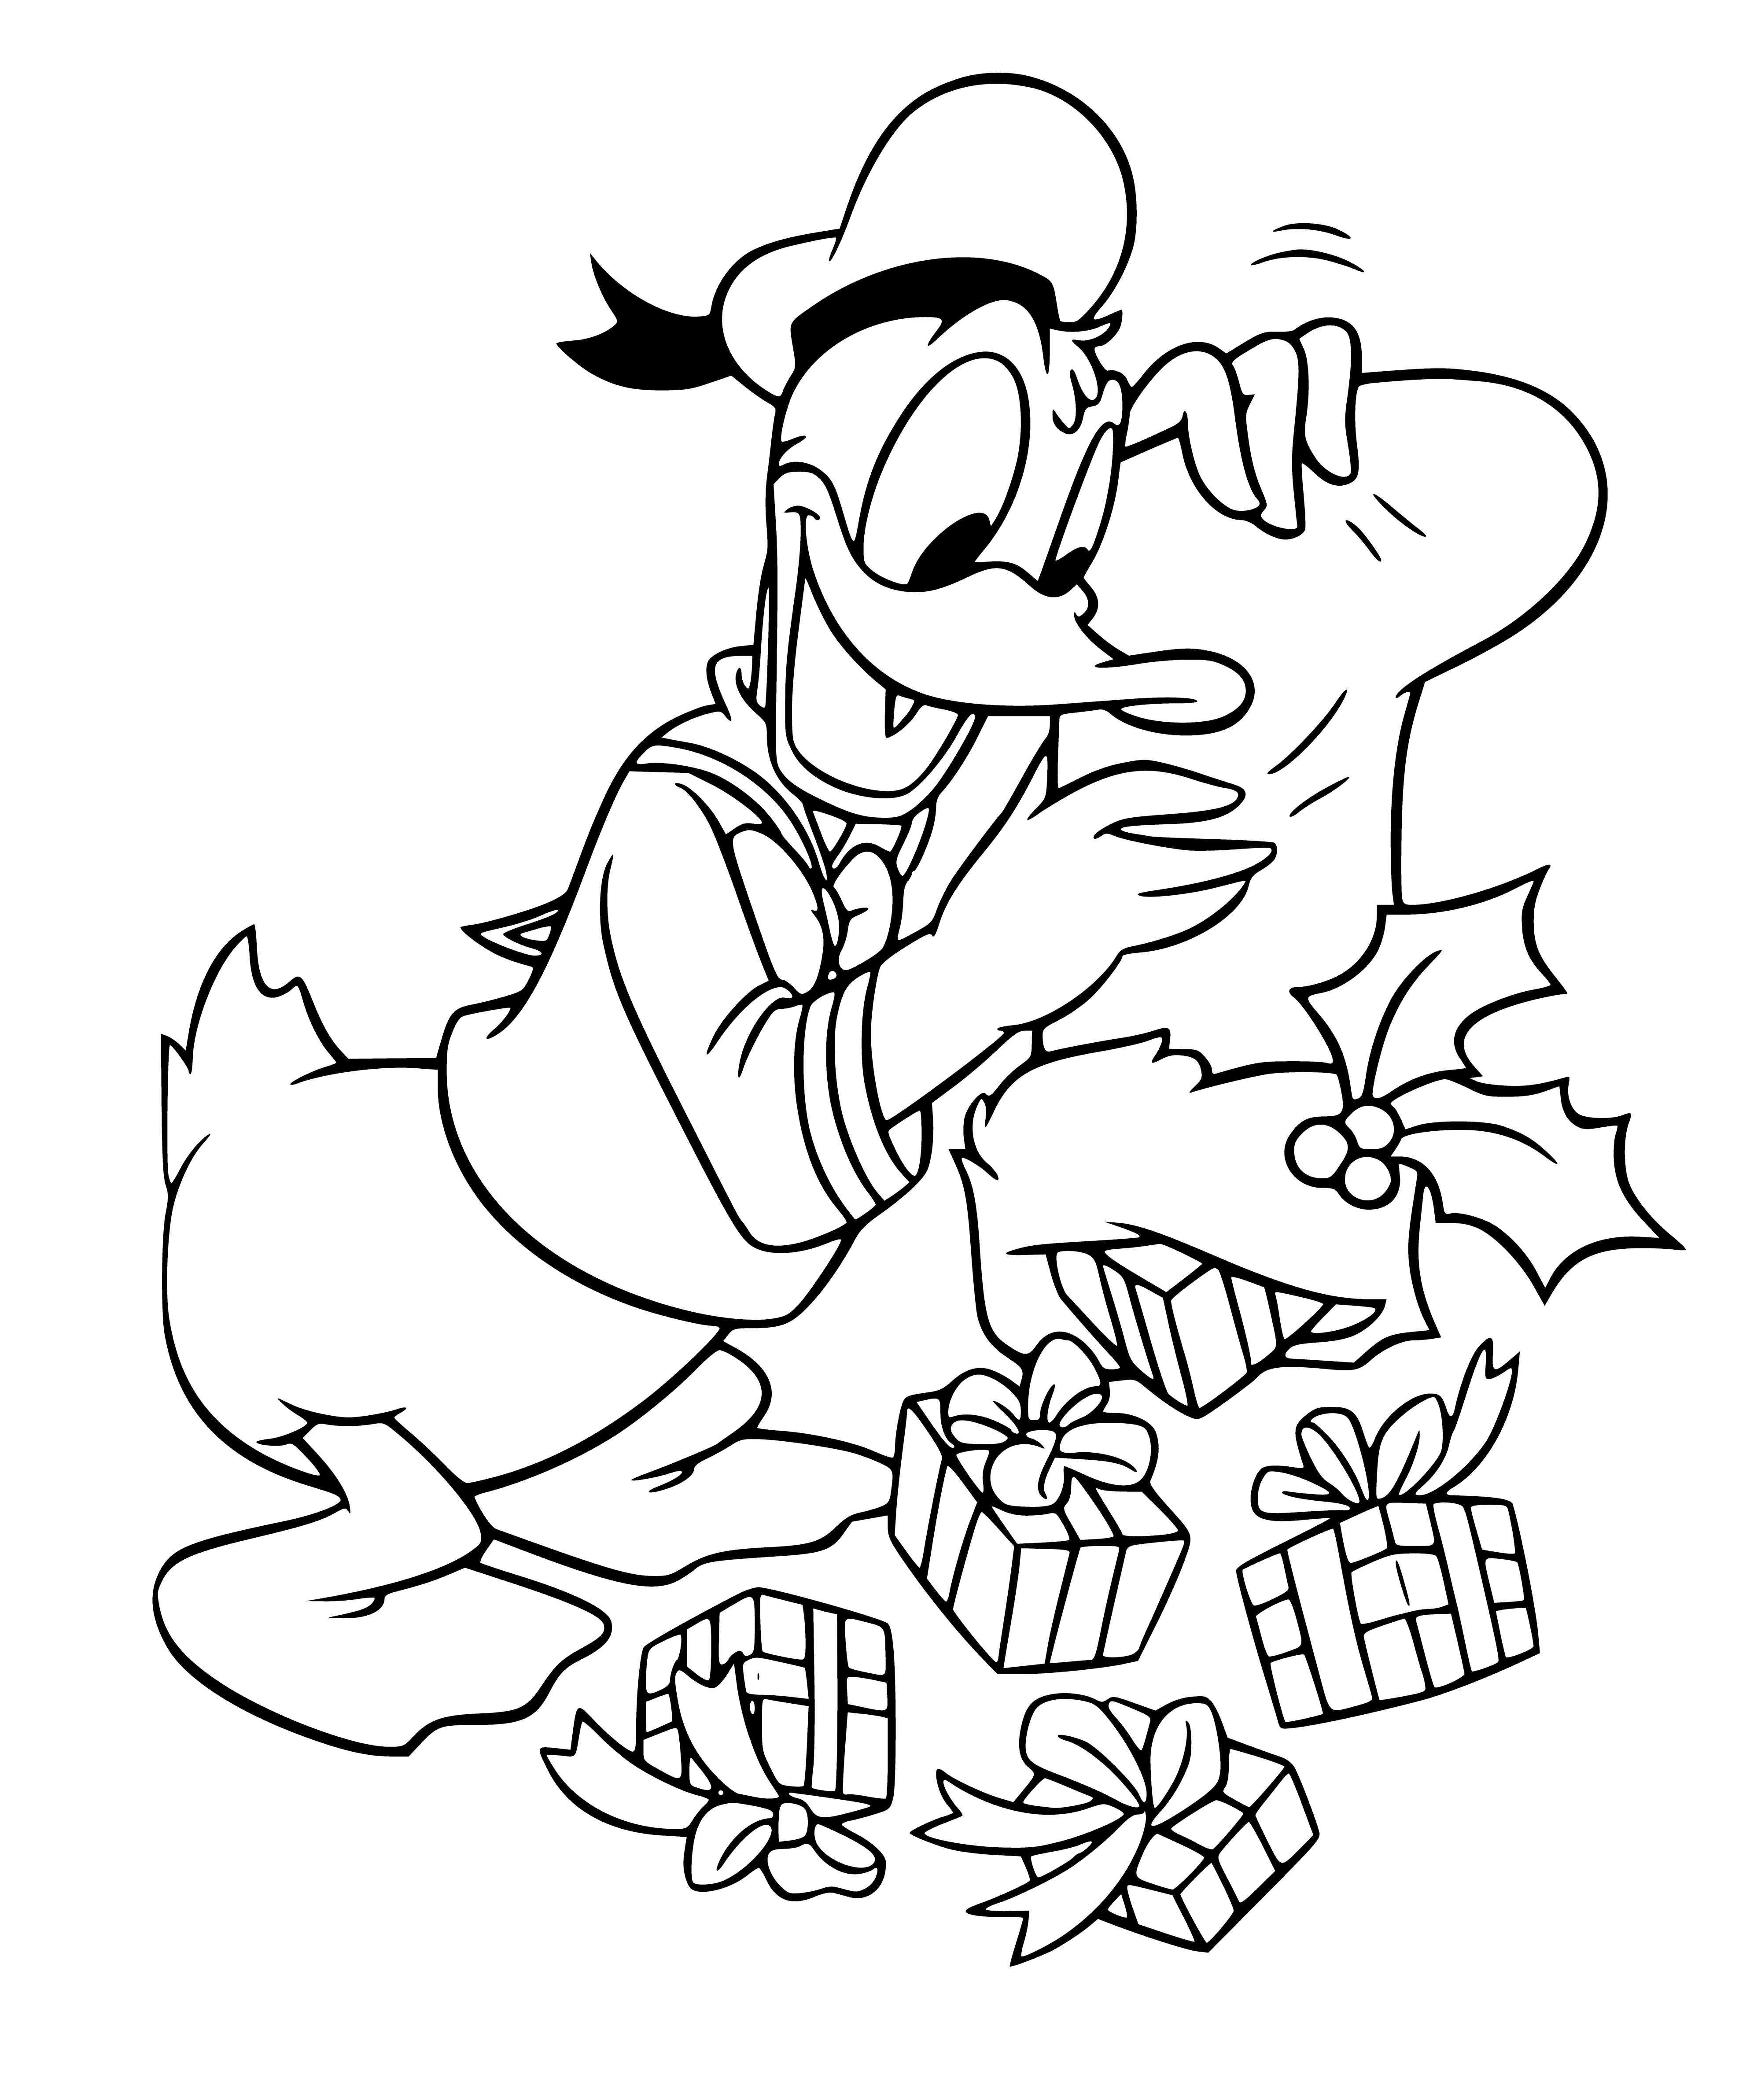 coloring page: Donald kneels before a twinkling tree, gifts piled around him, a big smile to share the holiday joy.